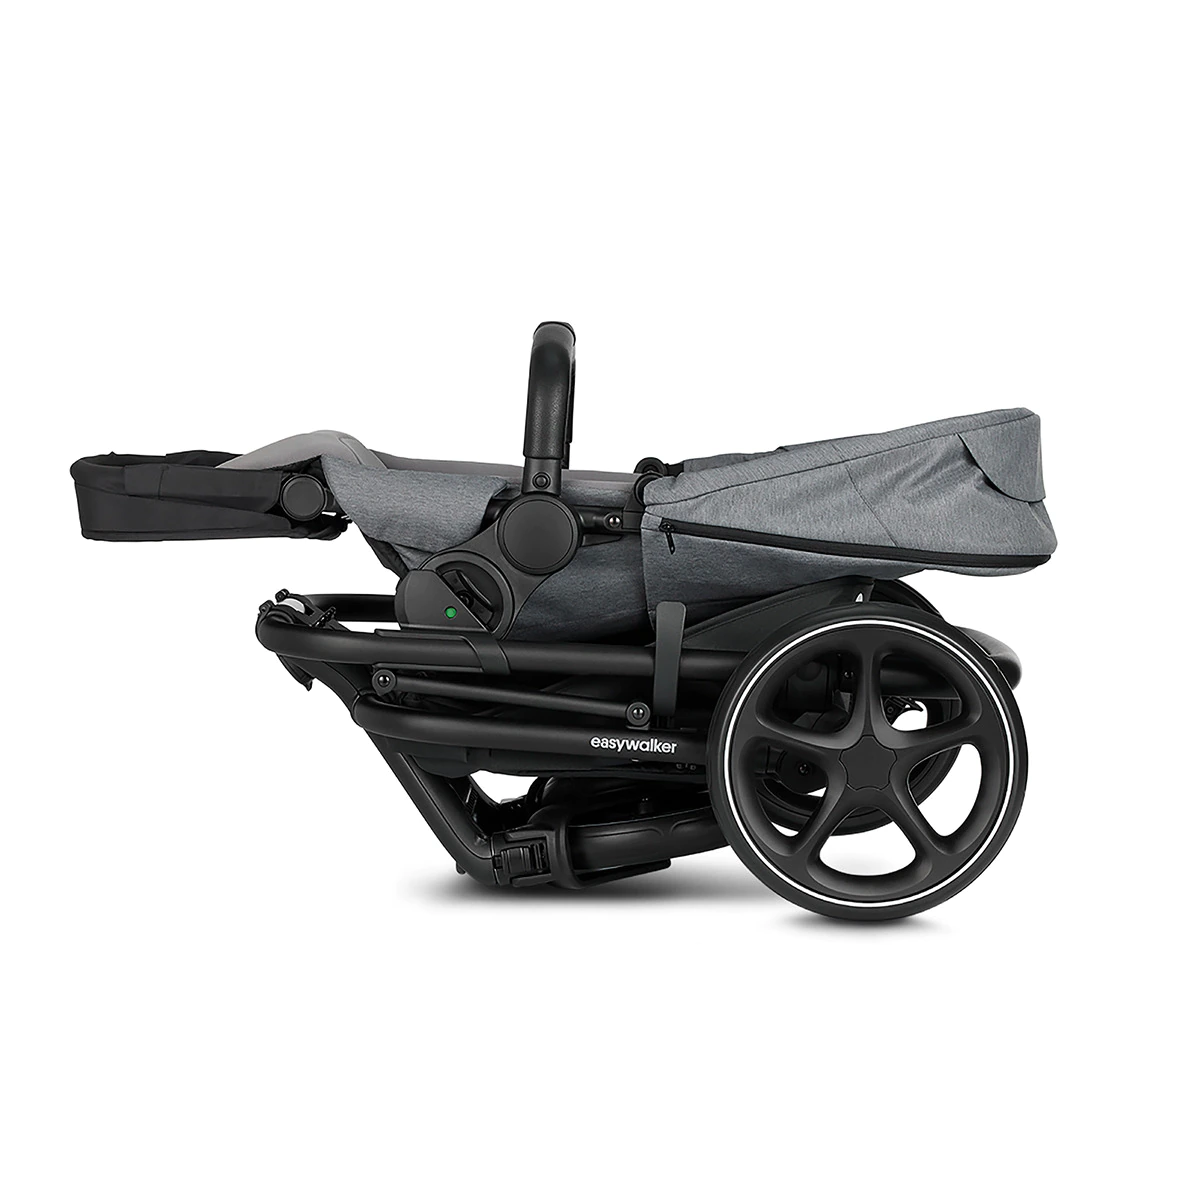 Carrito Duo Easywalker Harvey³ Fossil Grey